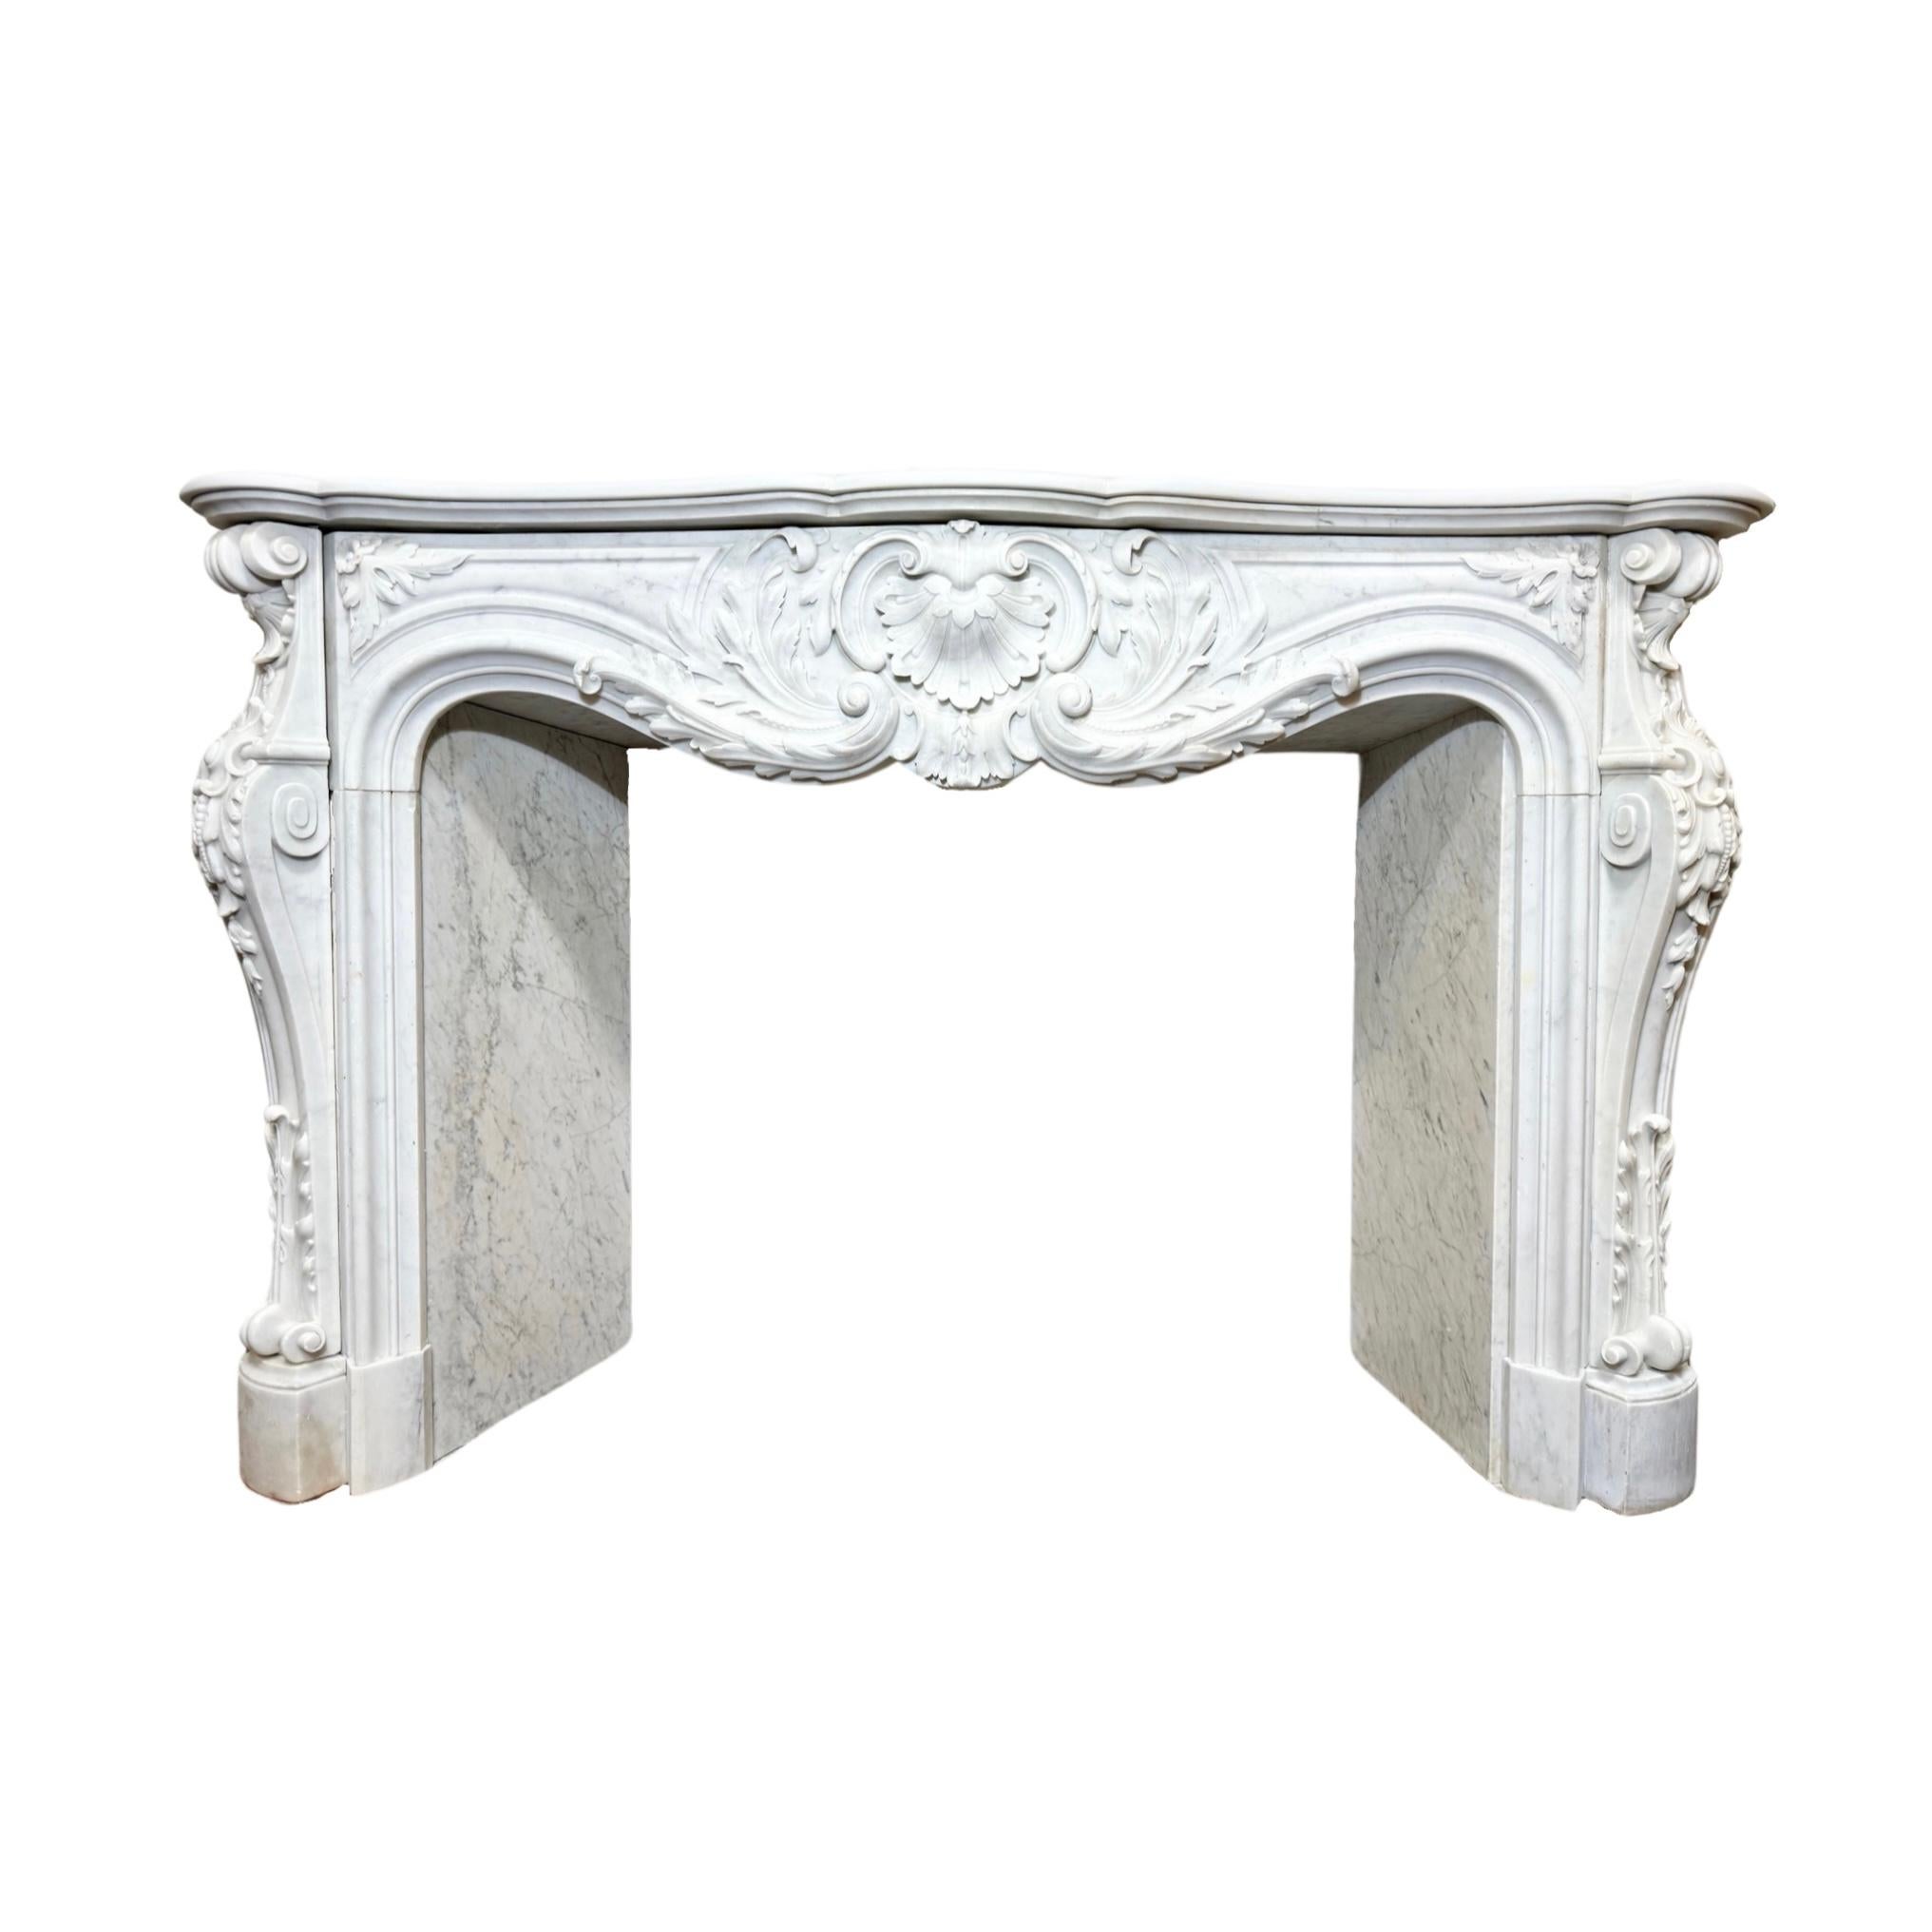 This elegant French Carrara Marble Mantel is crafted from high-quality white Carrara marble renowned for its durability and timeless beauty. Boasting an 1820s Louis the 15th style carved design, this stunning mantel is sure to elevate any living